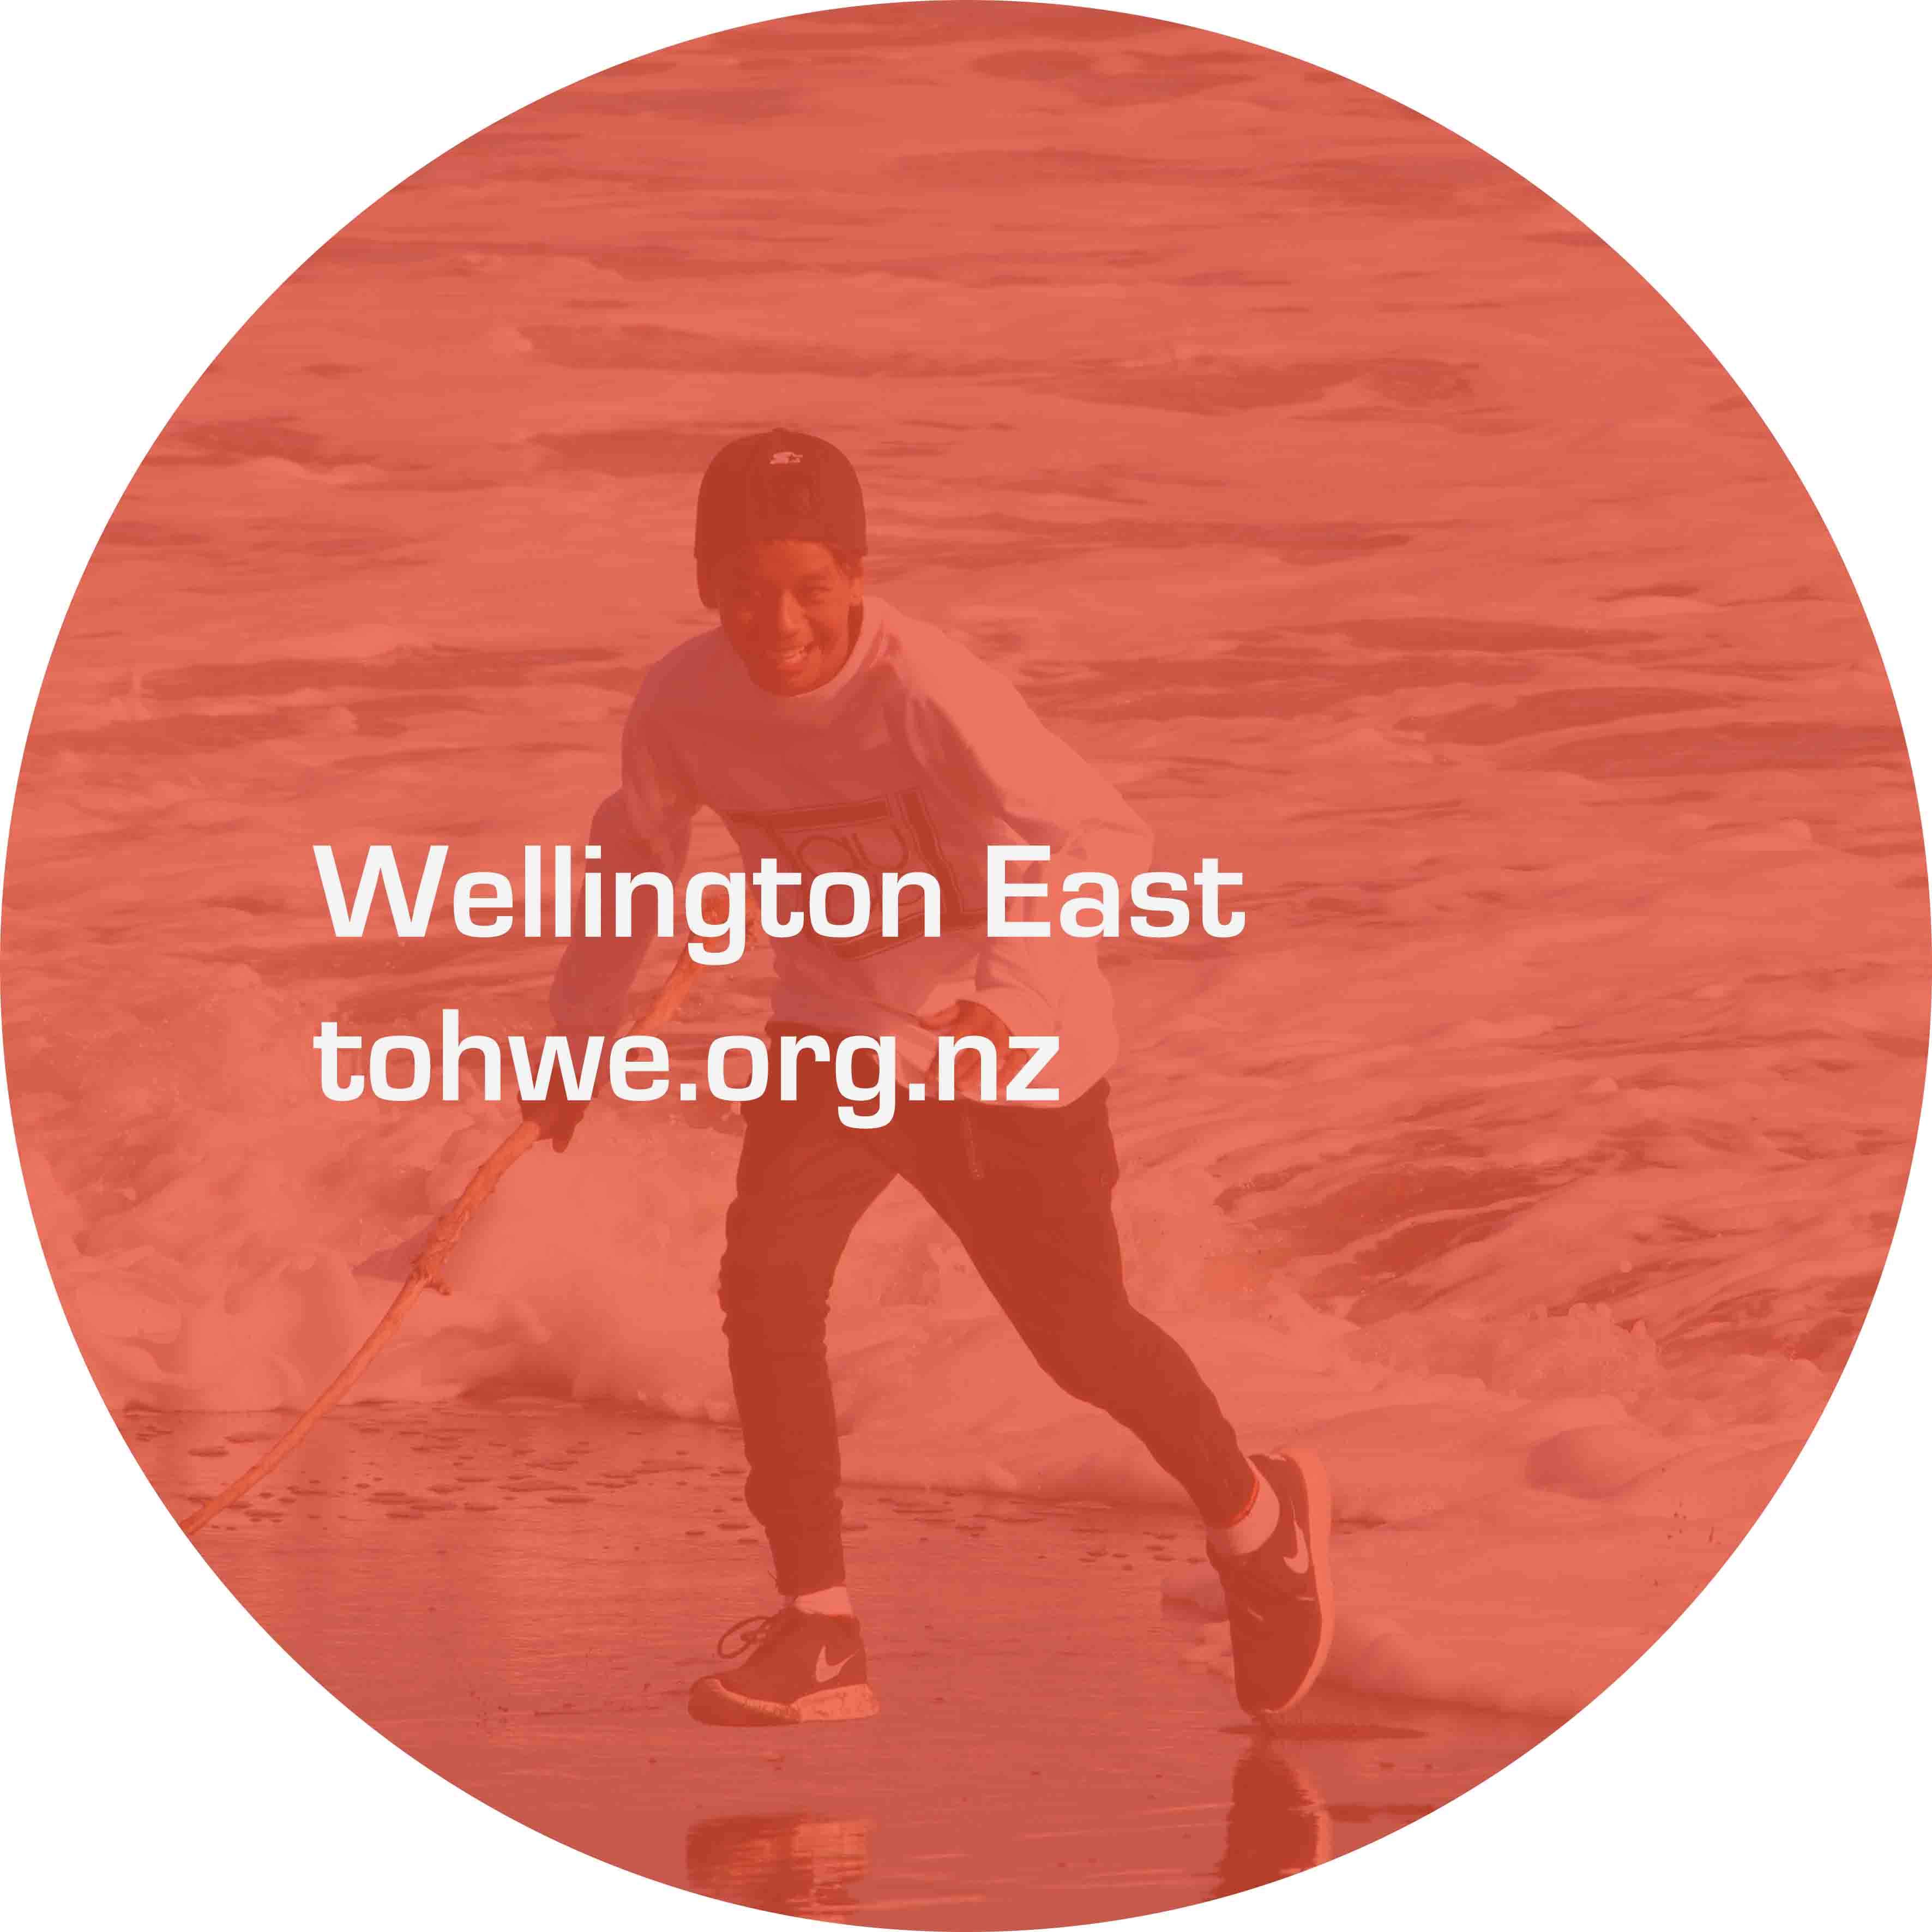 redirection to TOH Wellington East webpage